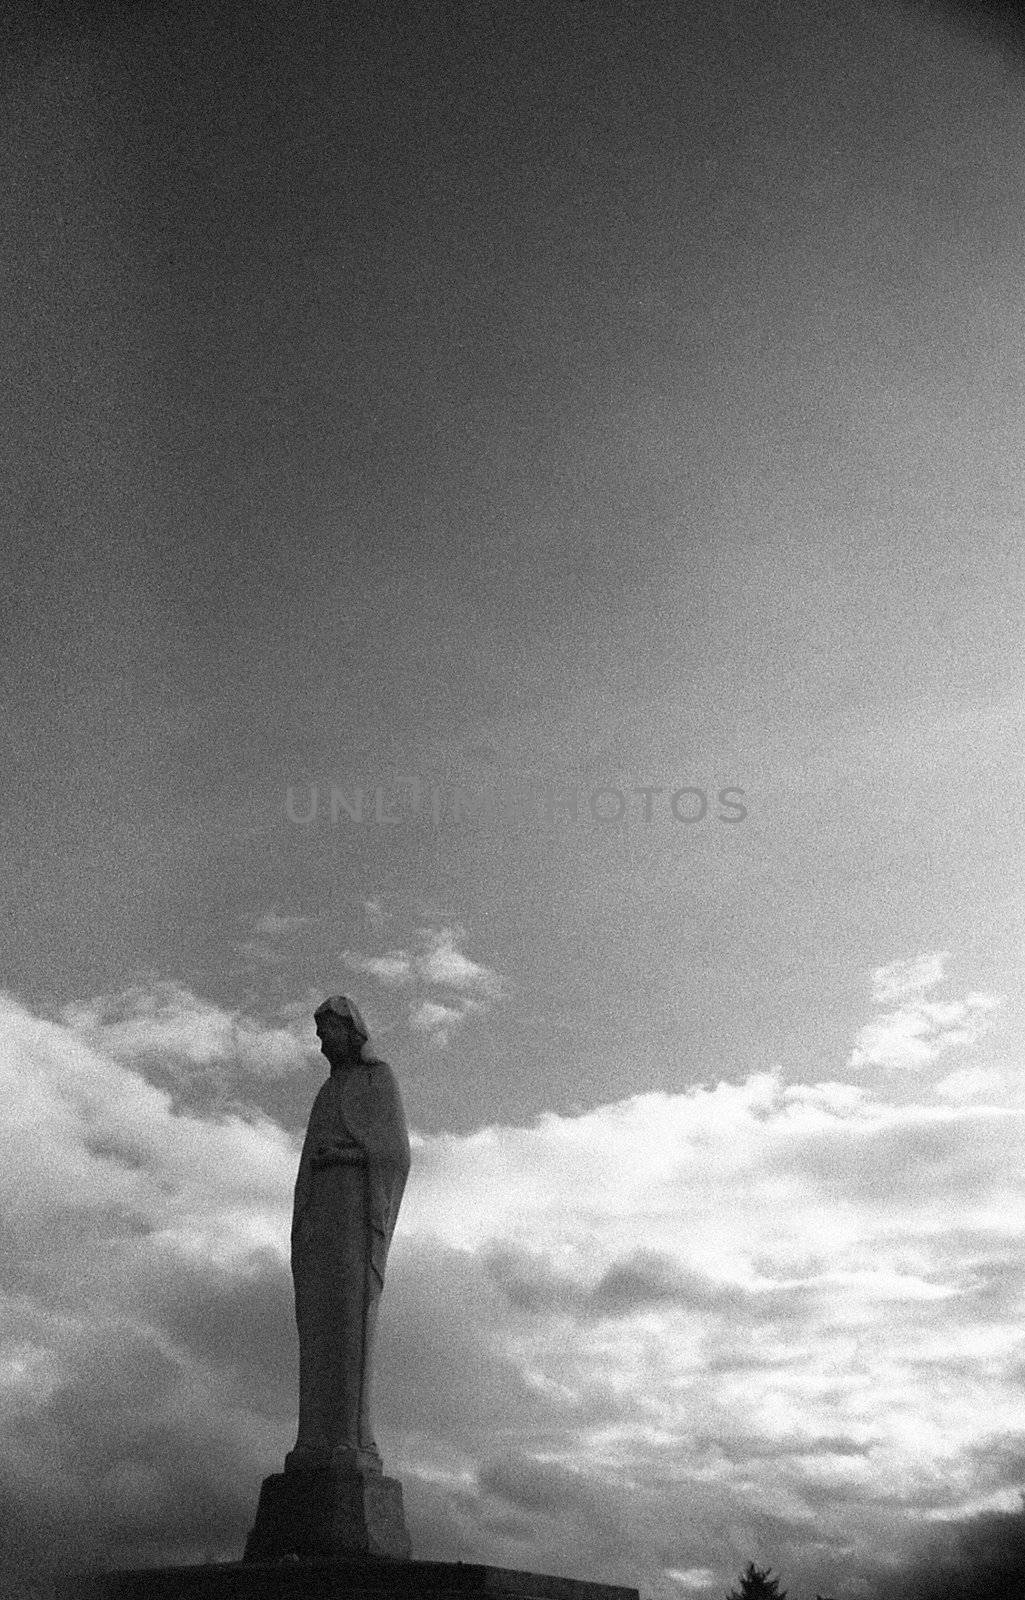 Religious statue of woman against ominous sky